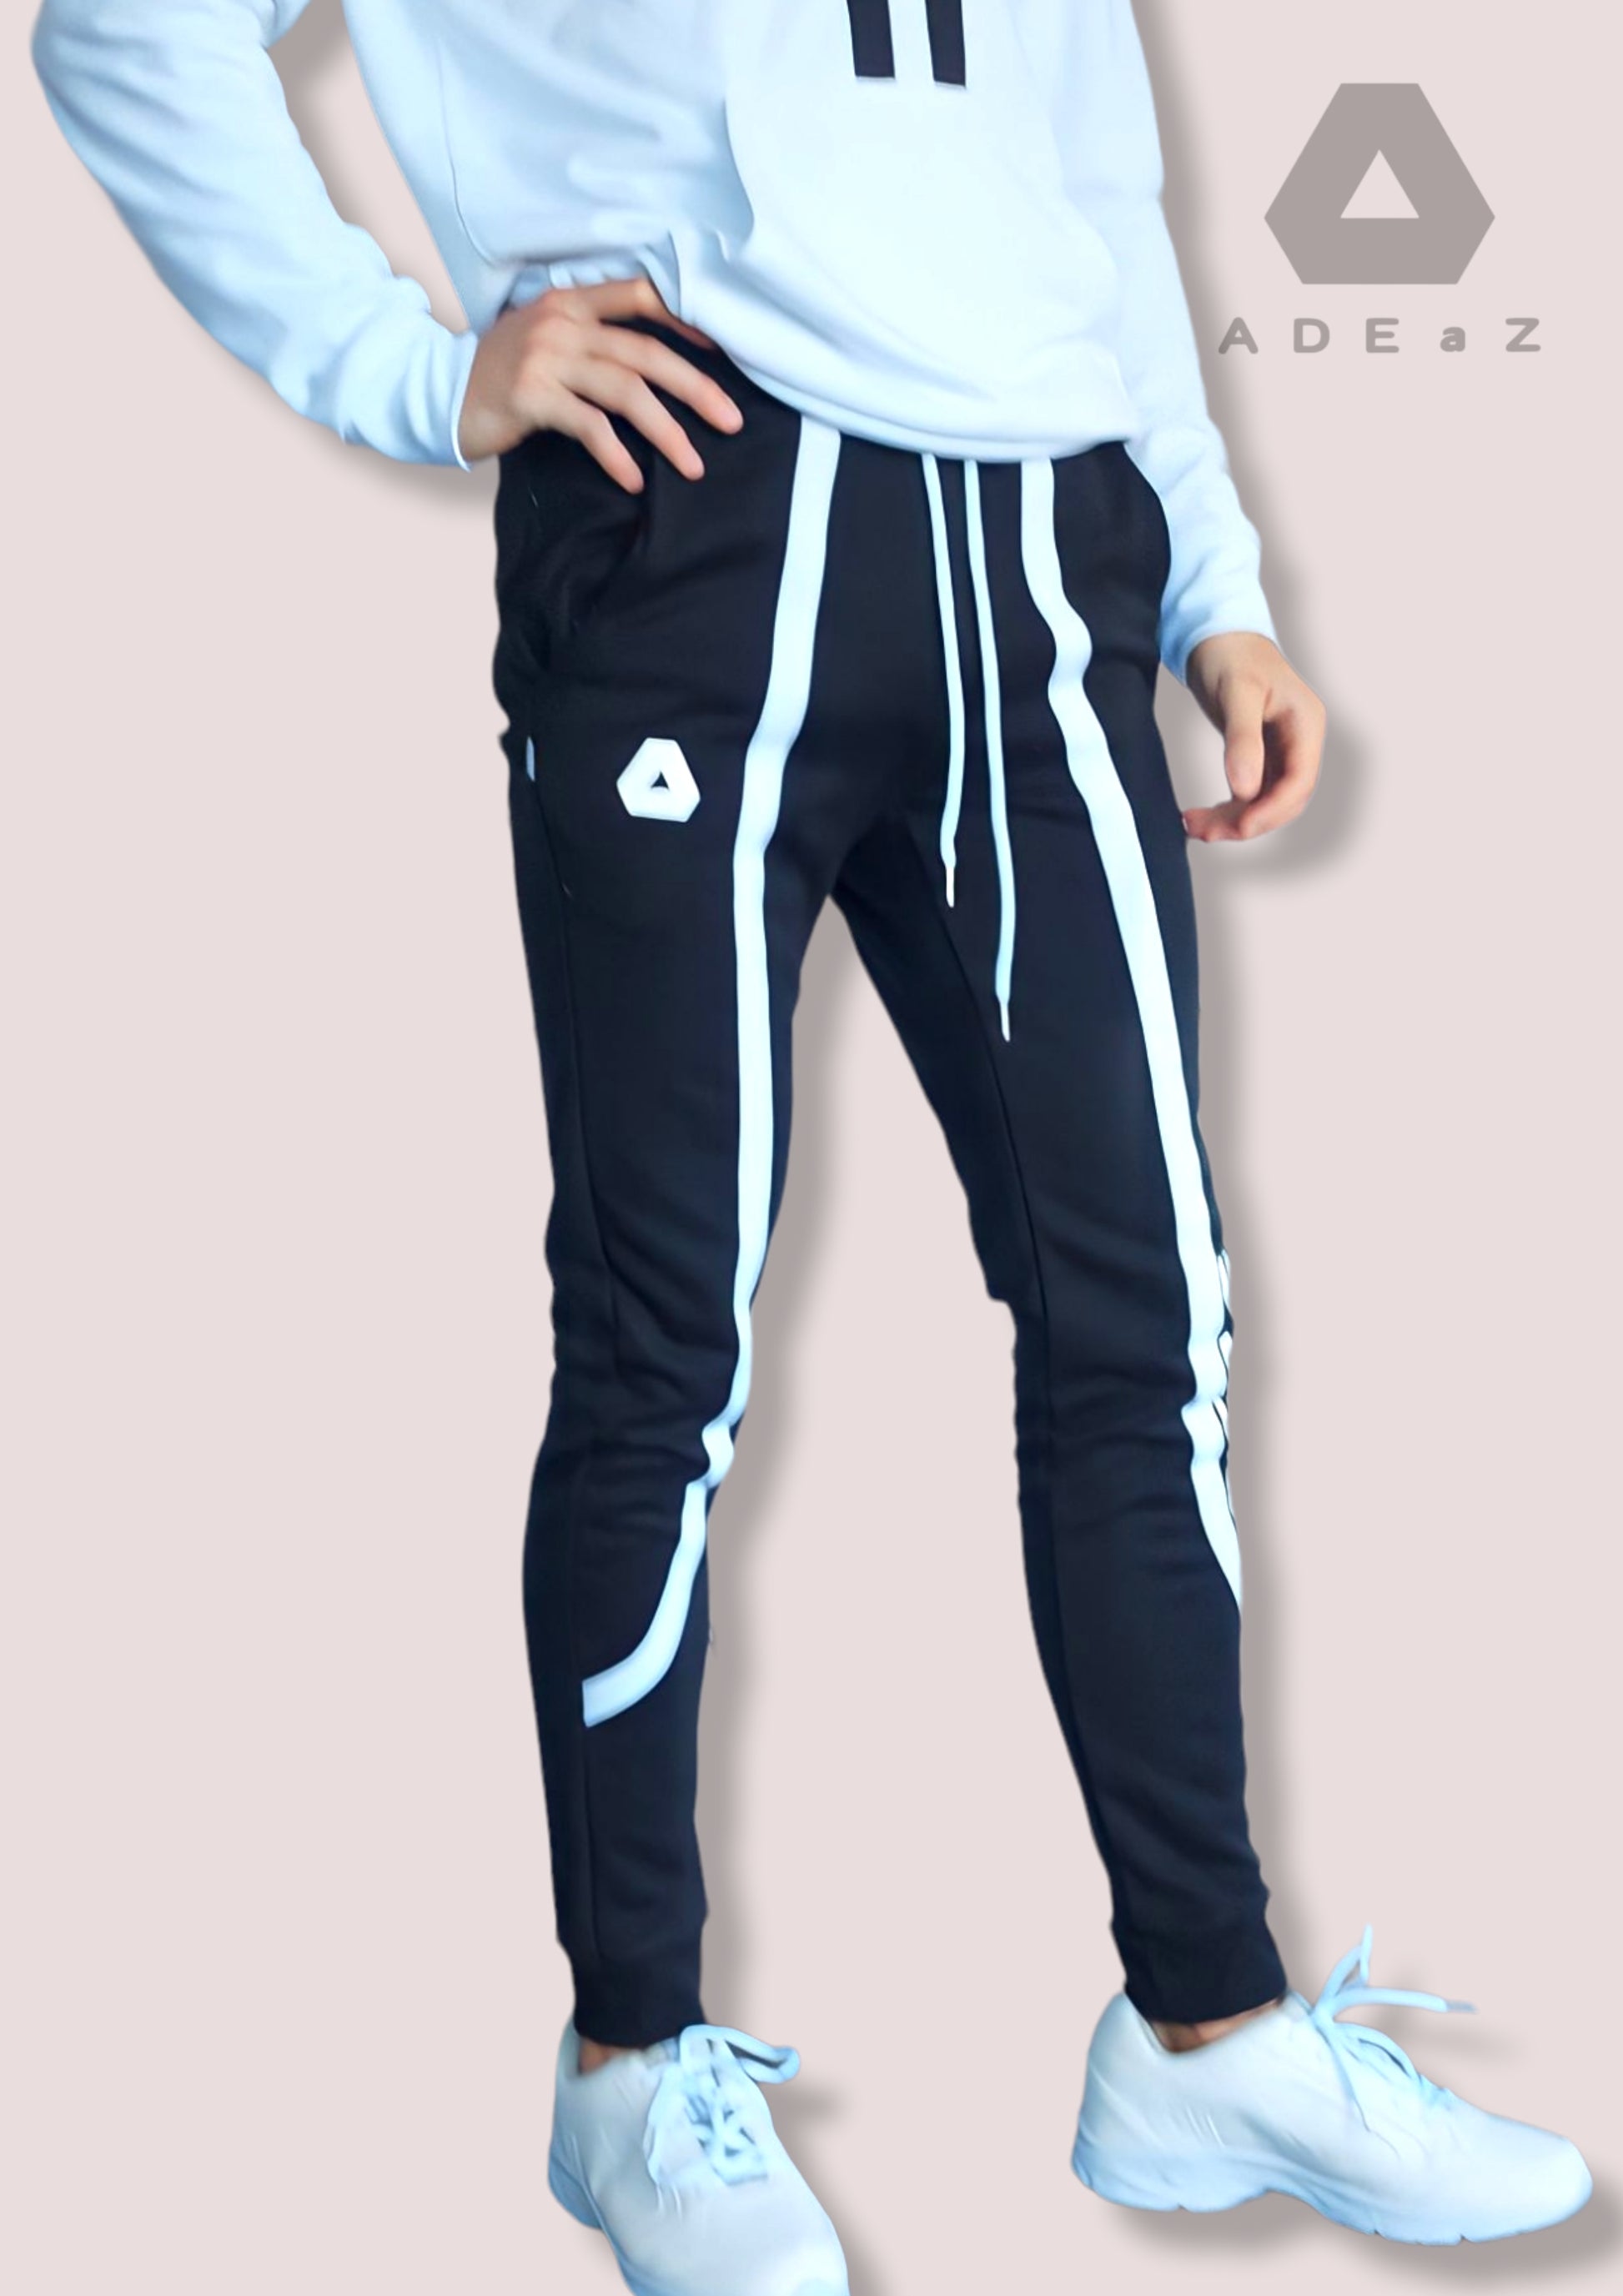 Men's Comfy Stripe Jogger: Relaxing and stylish striped jogger pants for comfortable leisure